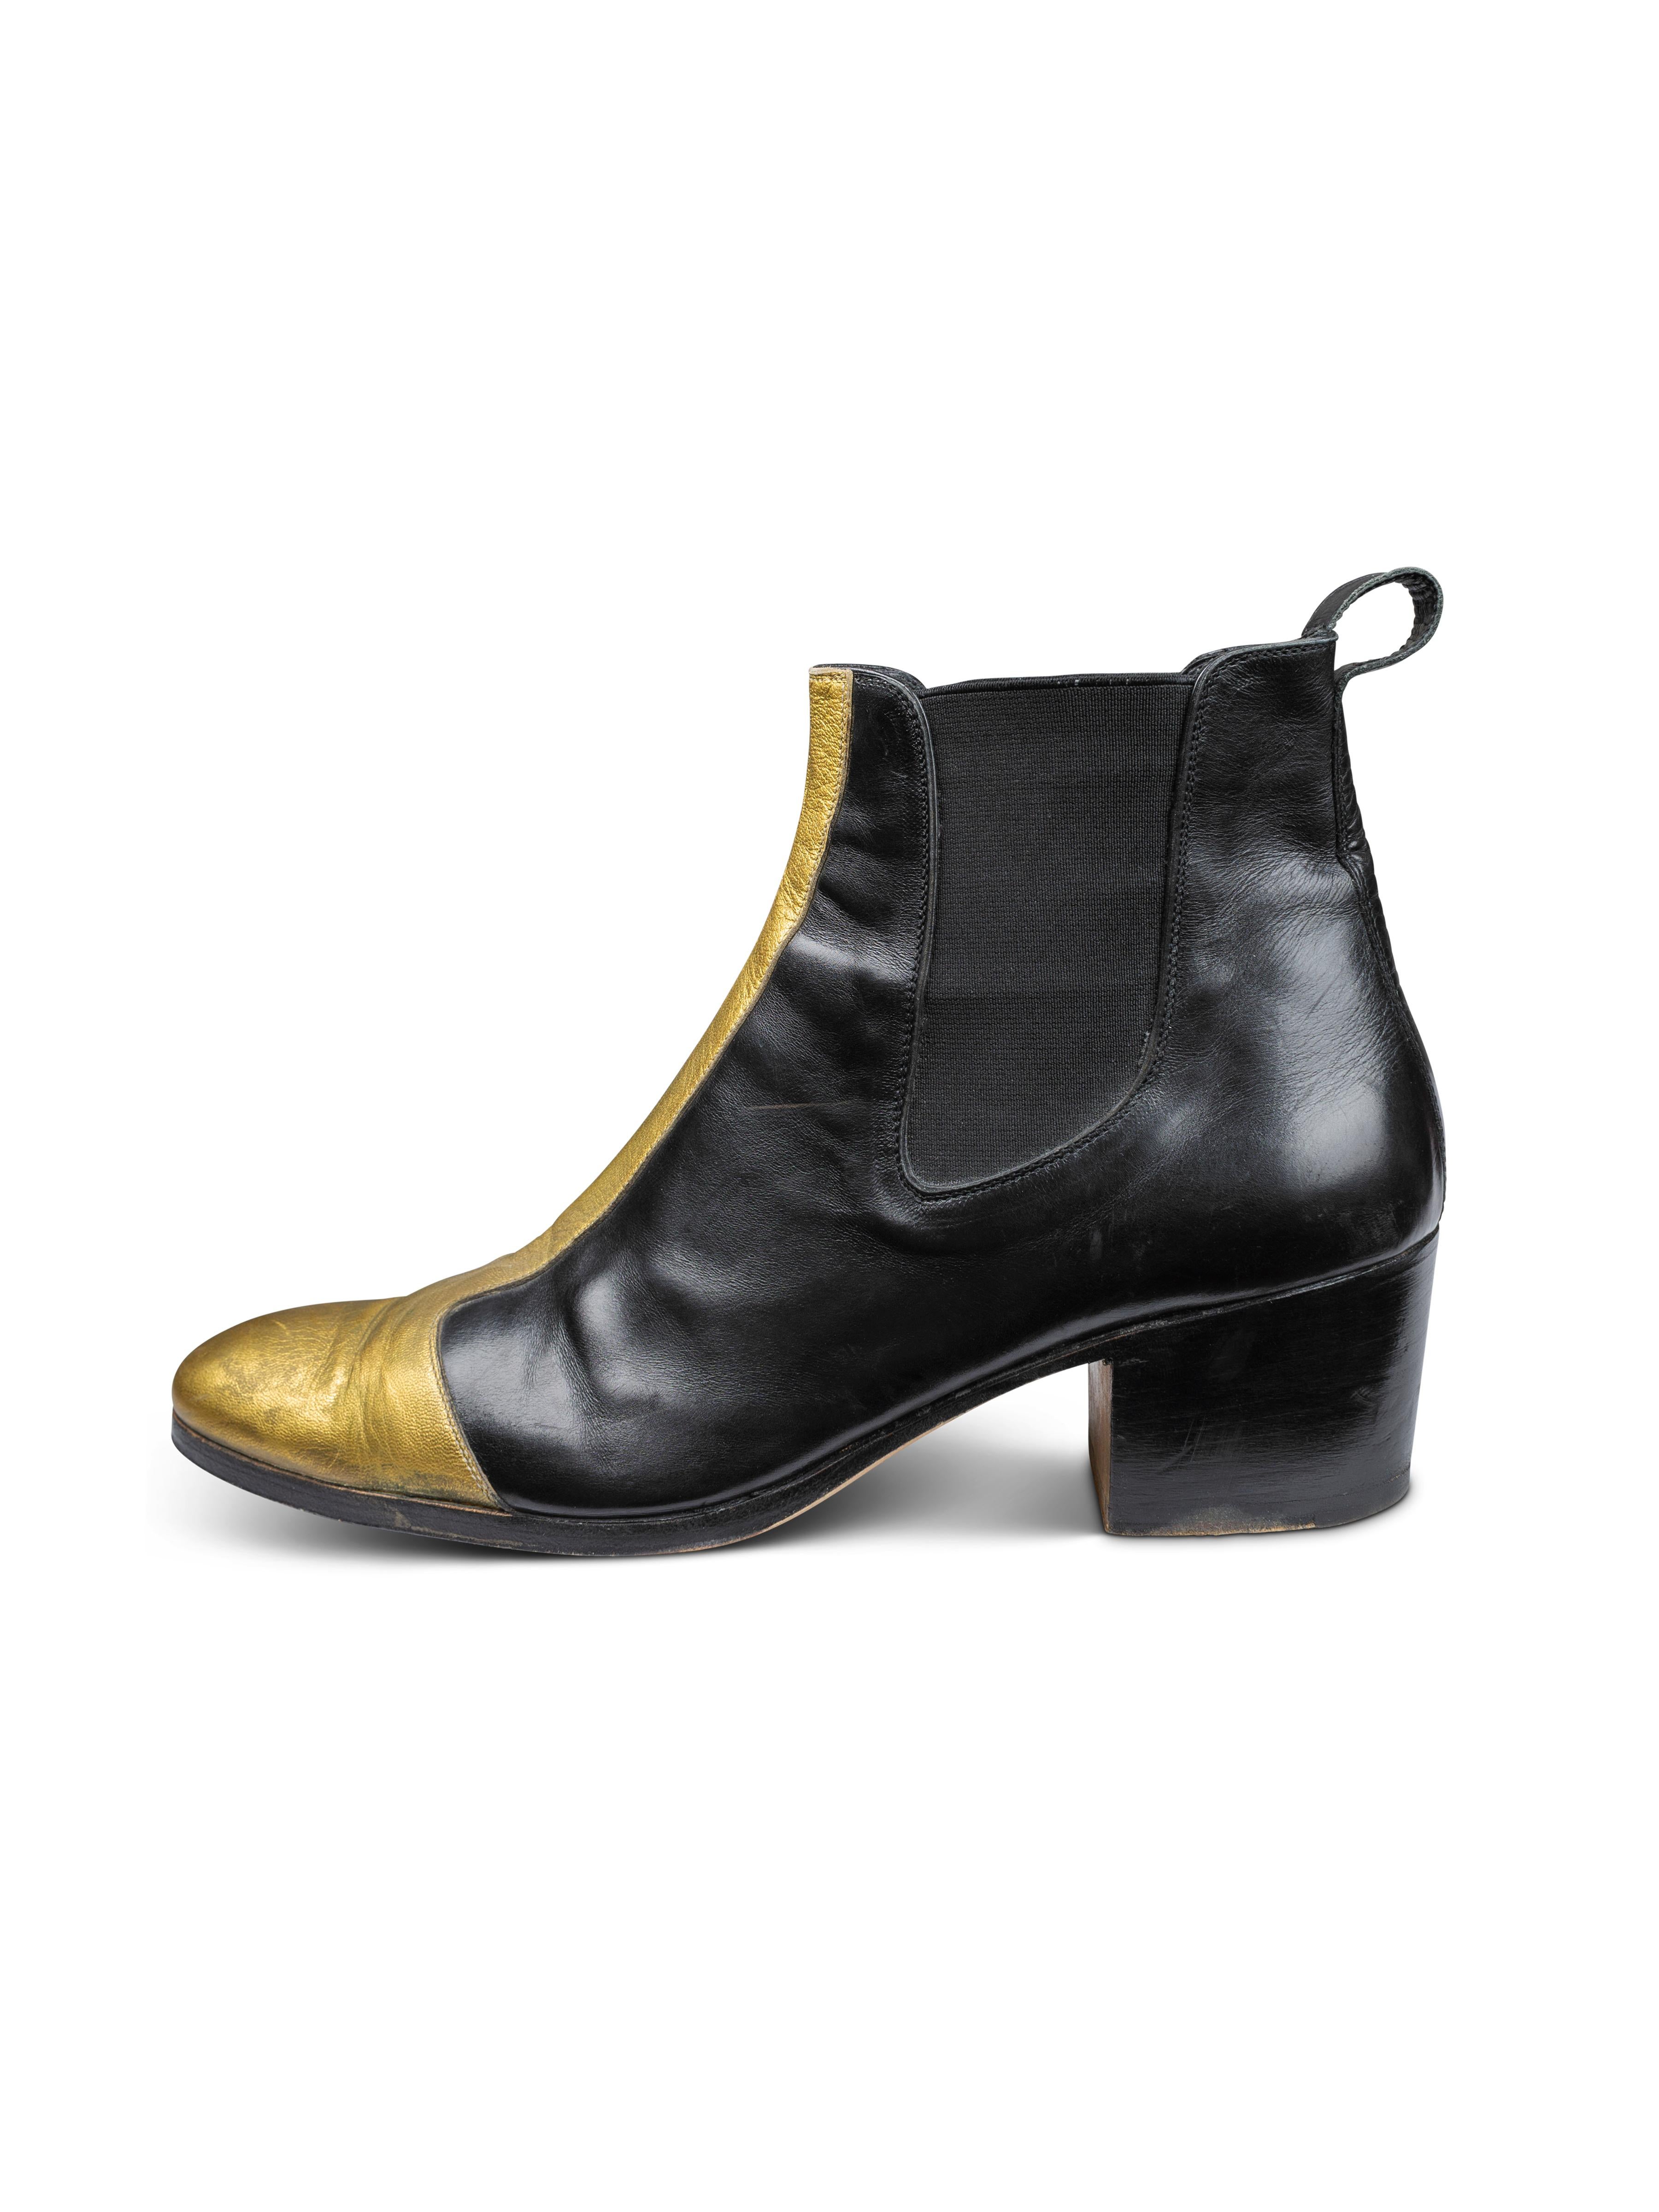 dior homme gold boots